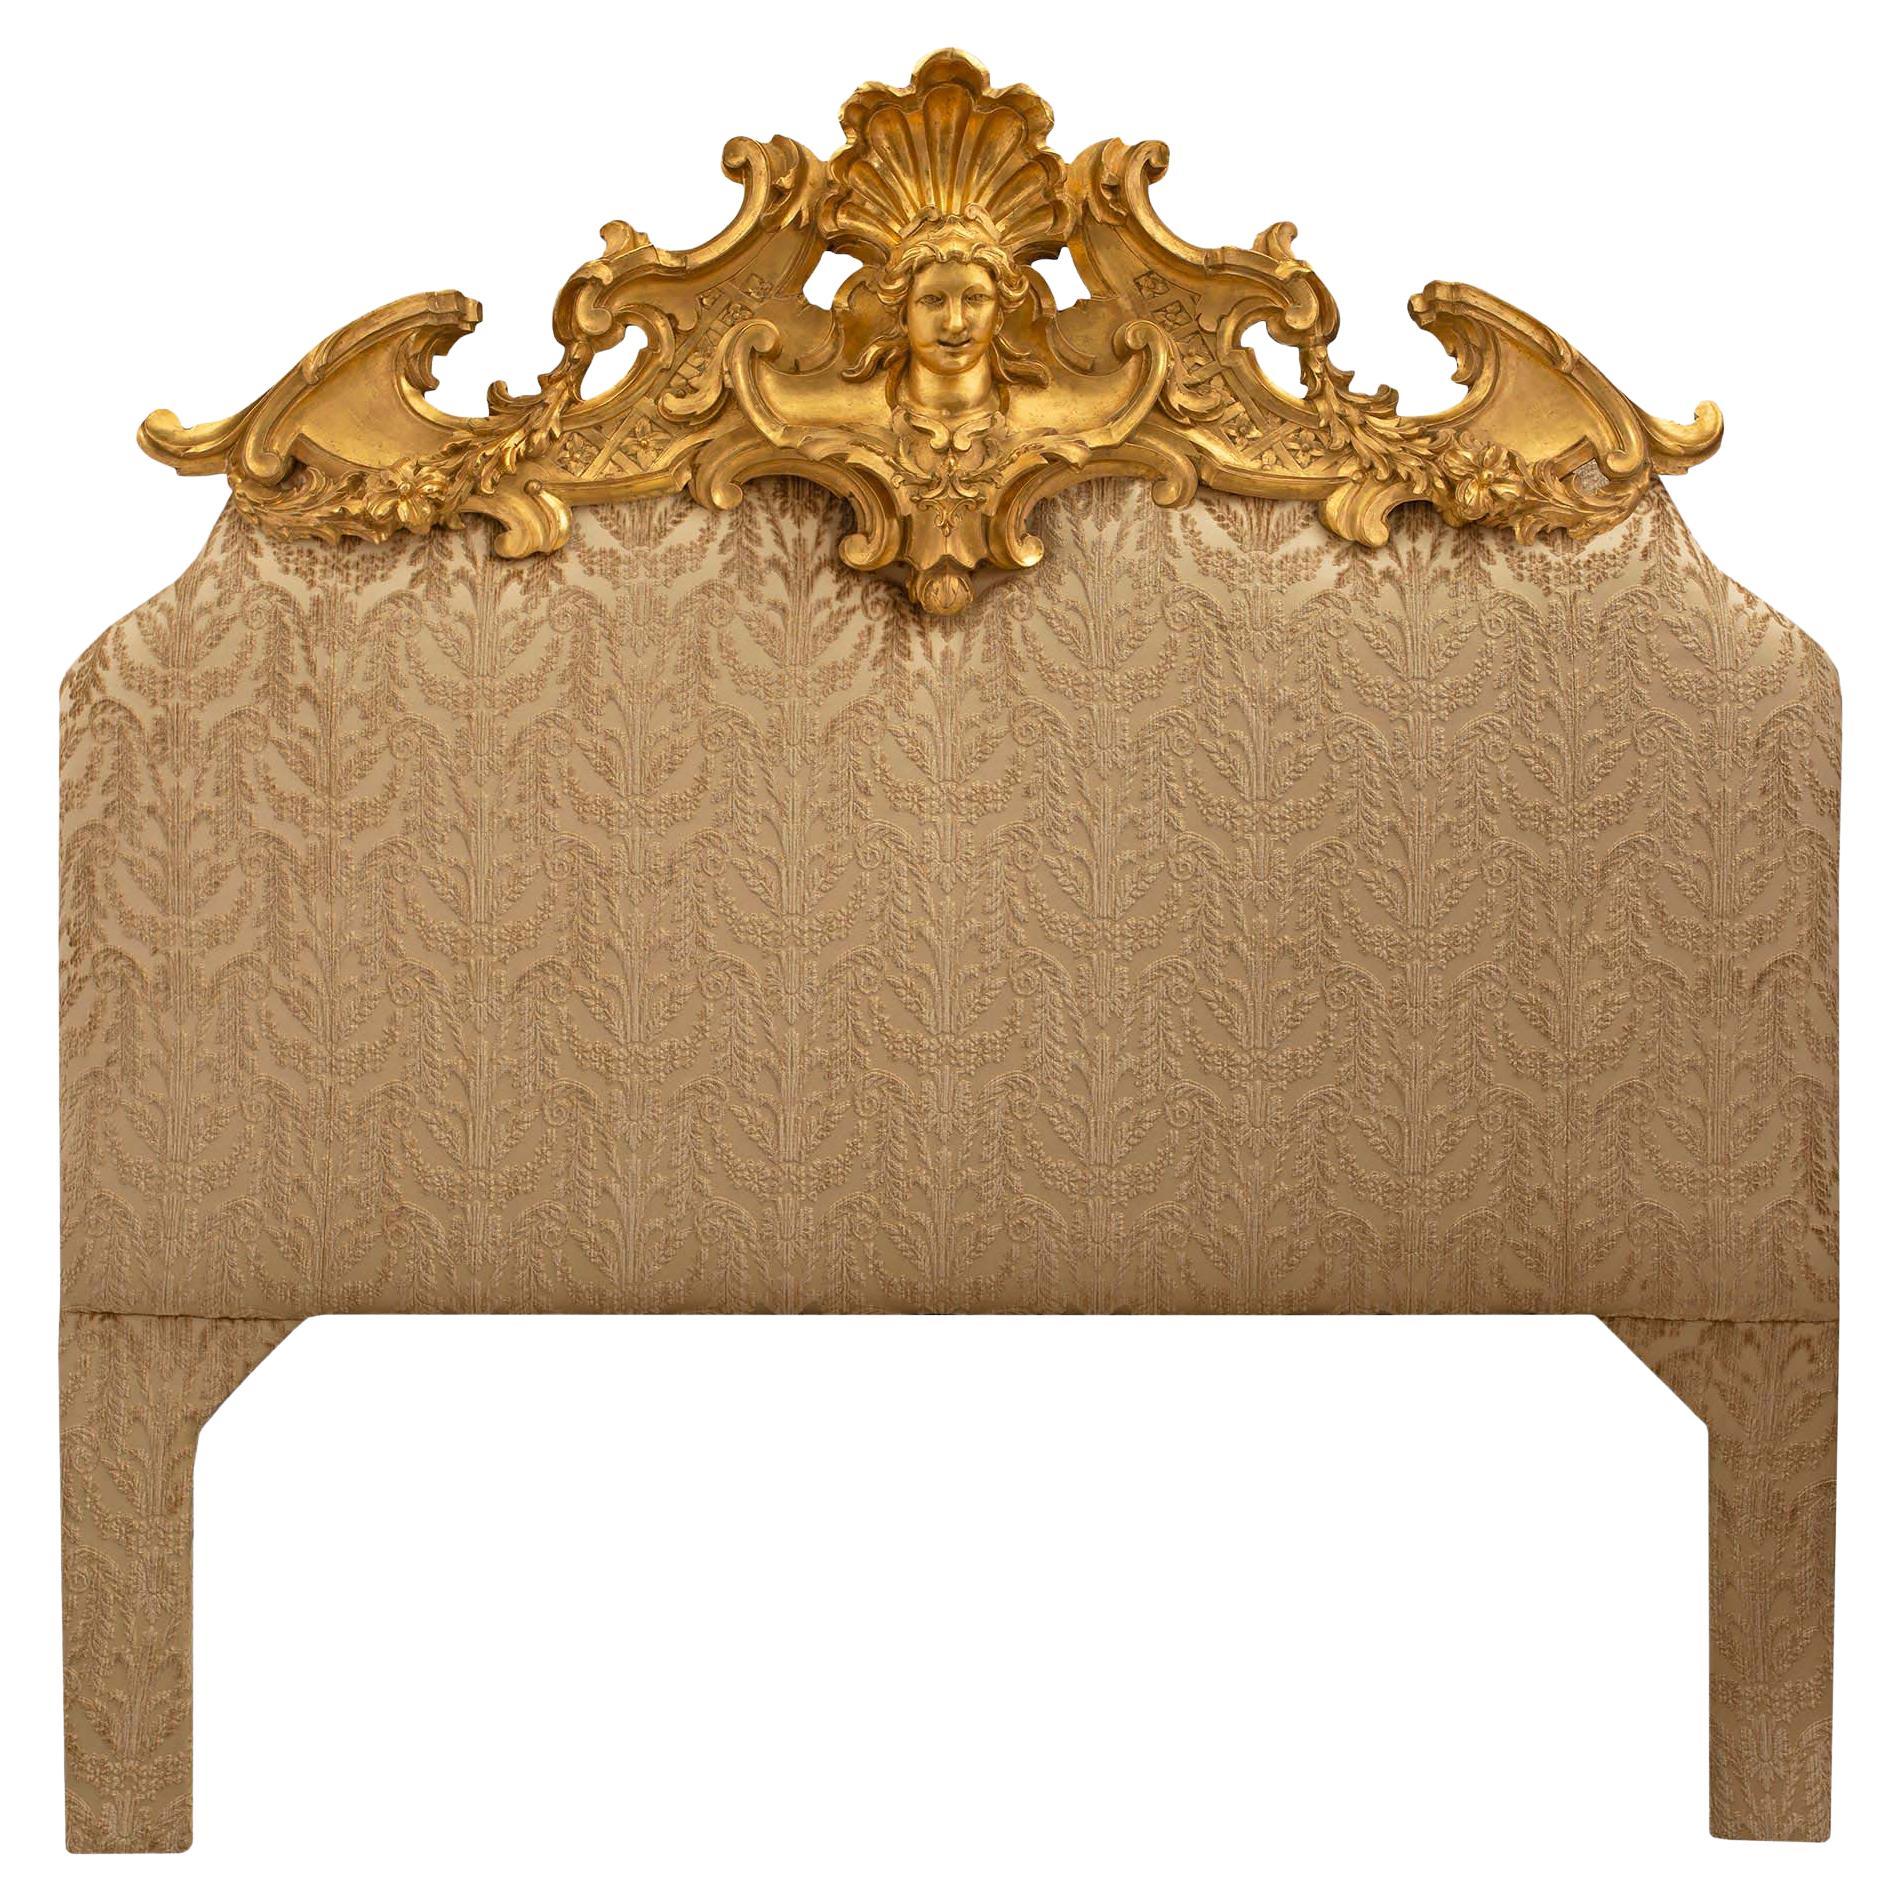 Italian Early 19th Century Louis XV Style Upholstered and Giltwood Headboard For Sale